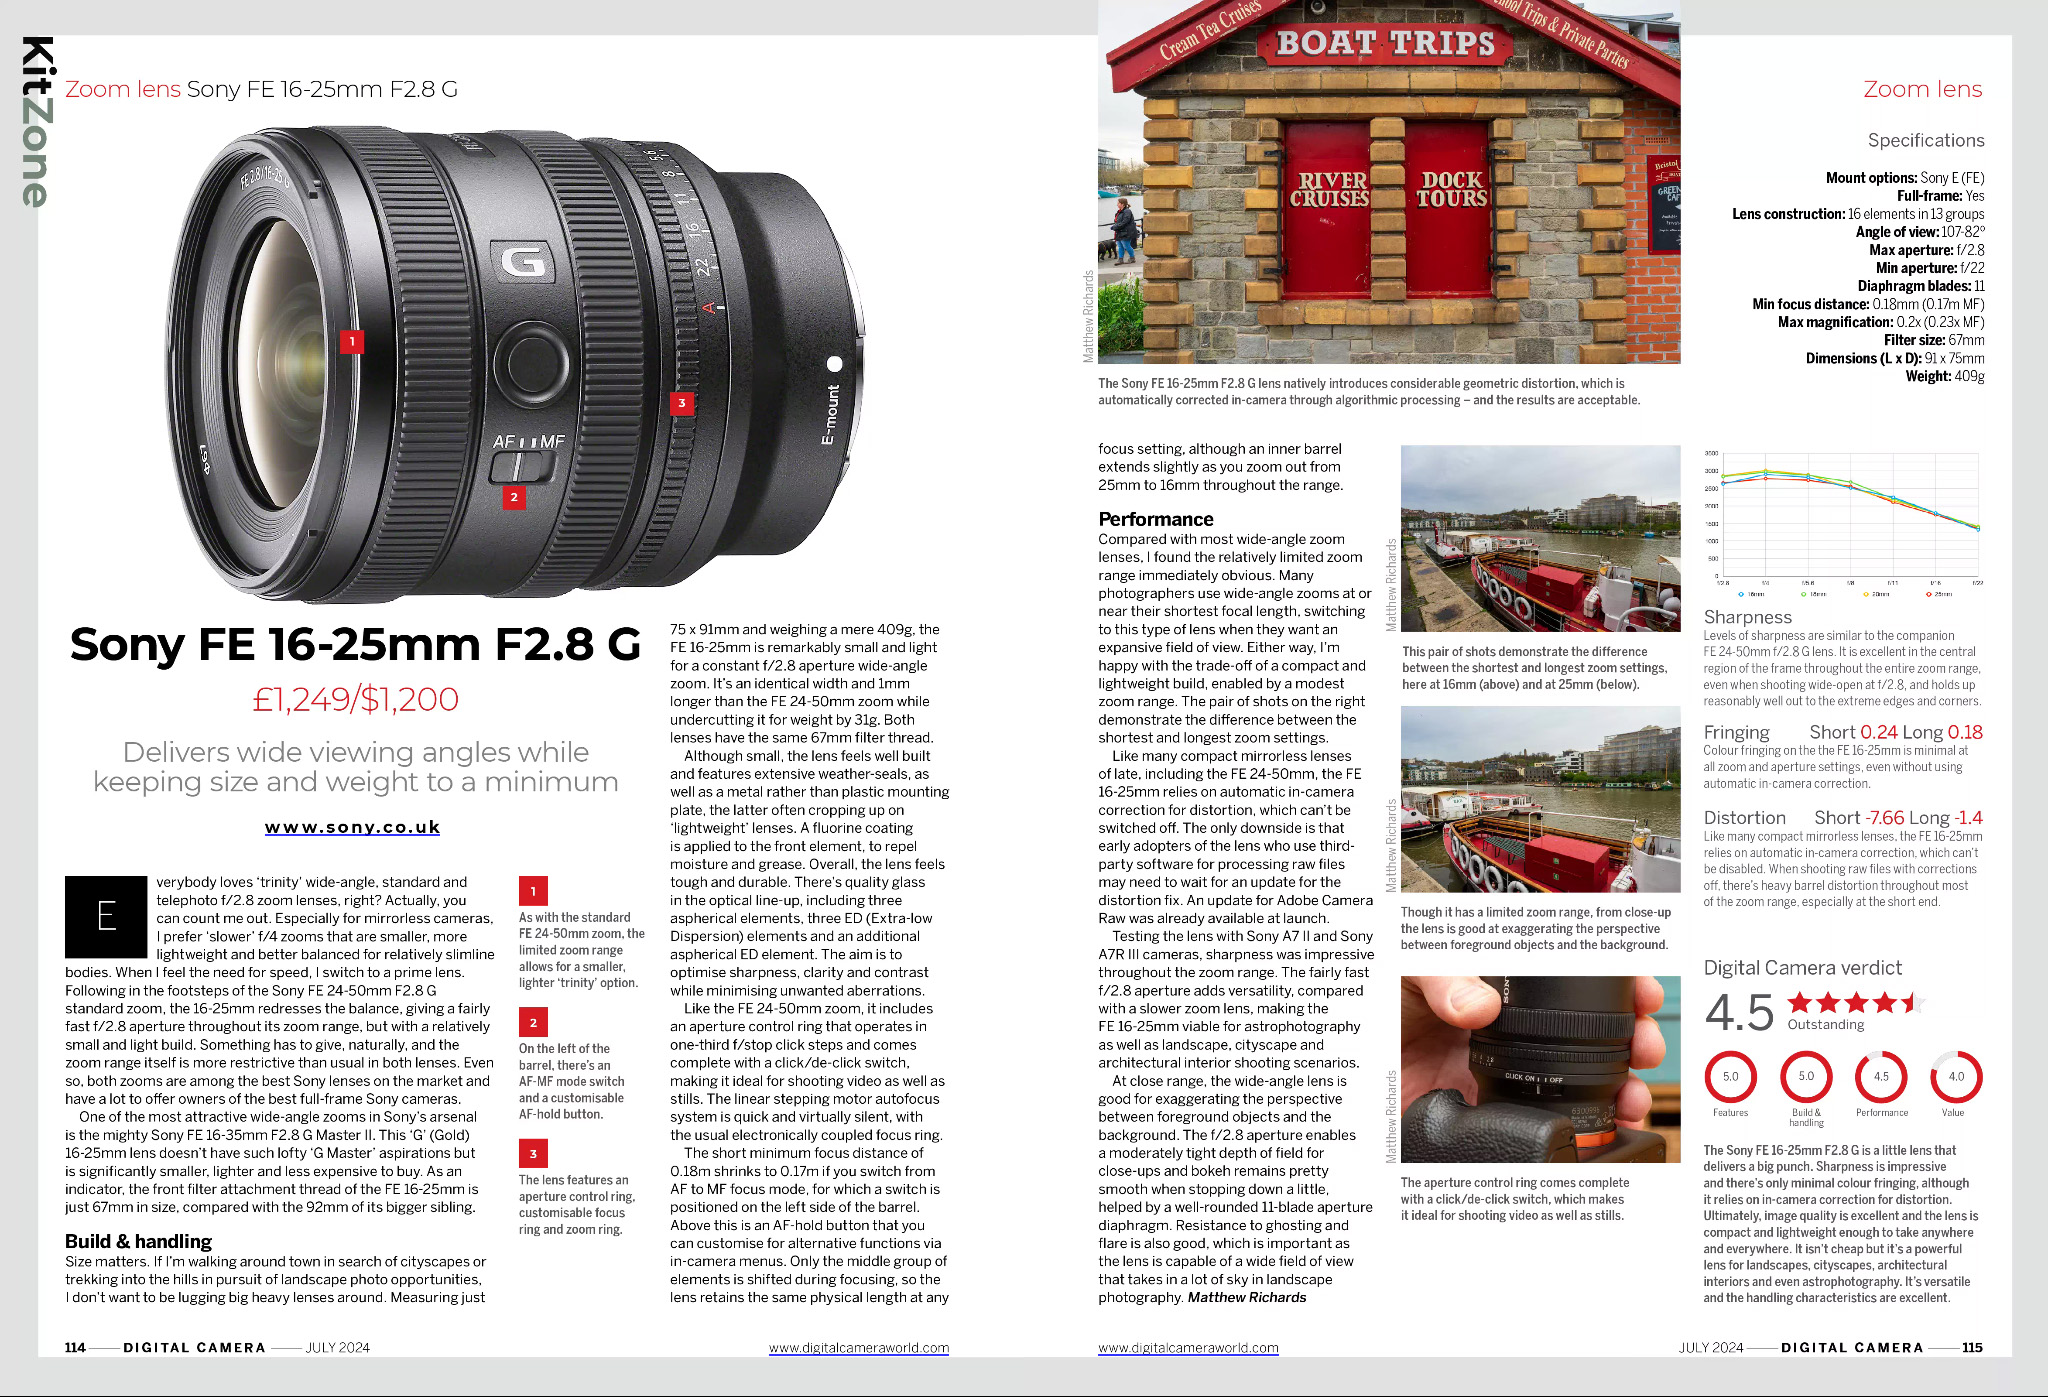 Image of the Sony FE 16-25mm F2.8 G review in the July 2024 issue of Digital Camera magazine